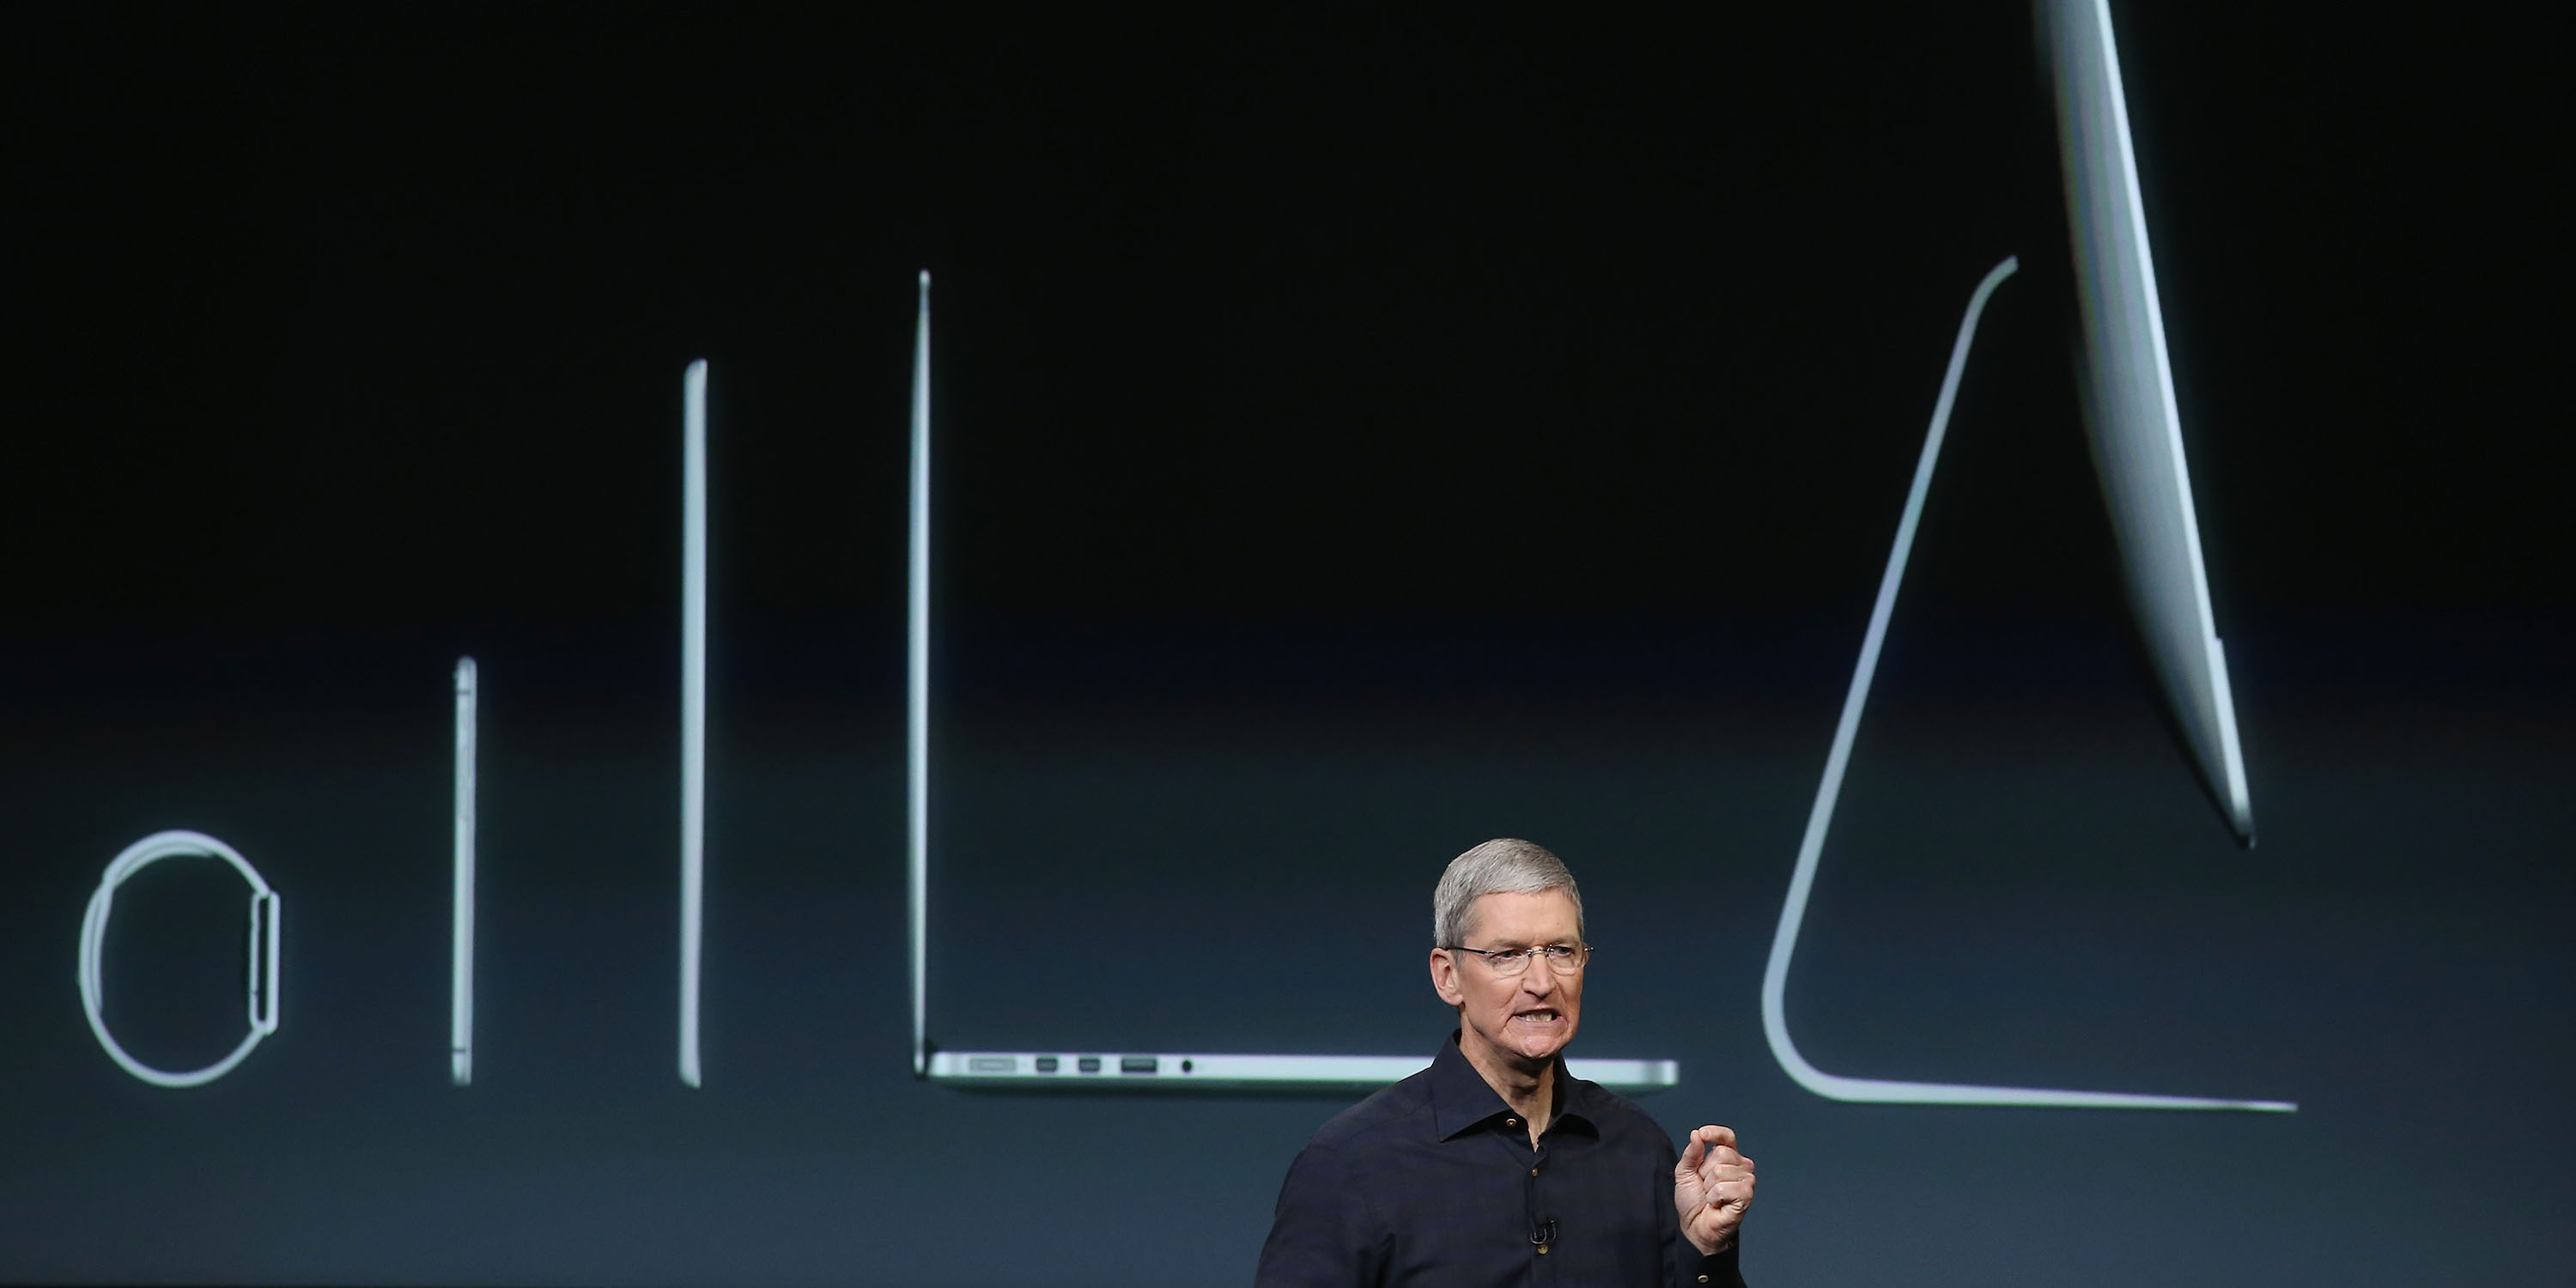 CUPERTINO, CA - OCTOBER 16: Apple CEO Tim Cook speaks during an event introducing new iPads at Apple's headquarters October 16, 2014 in Cupertino, California. (Photo by Justin Sullivan/Getty Images)